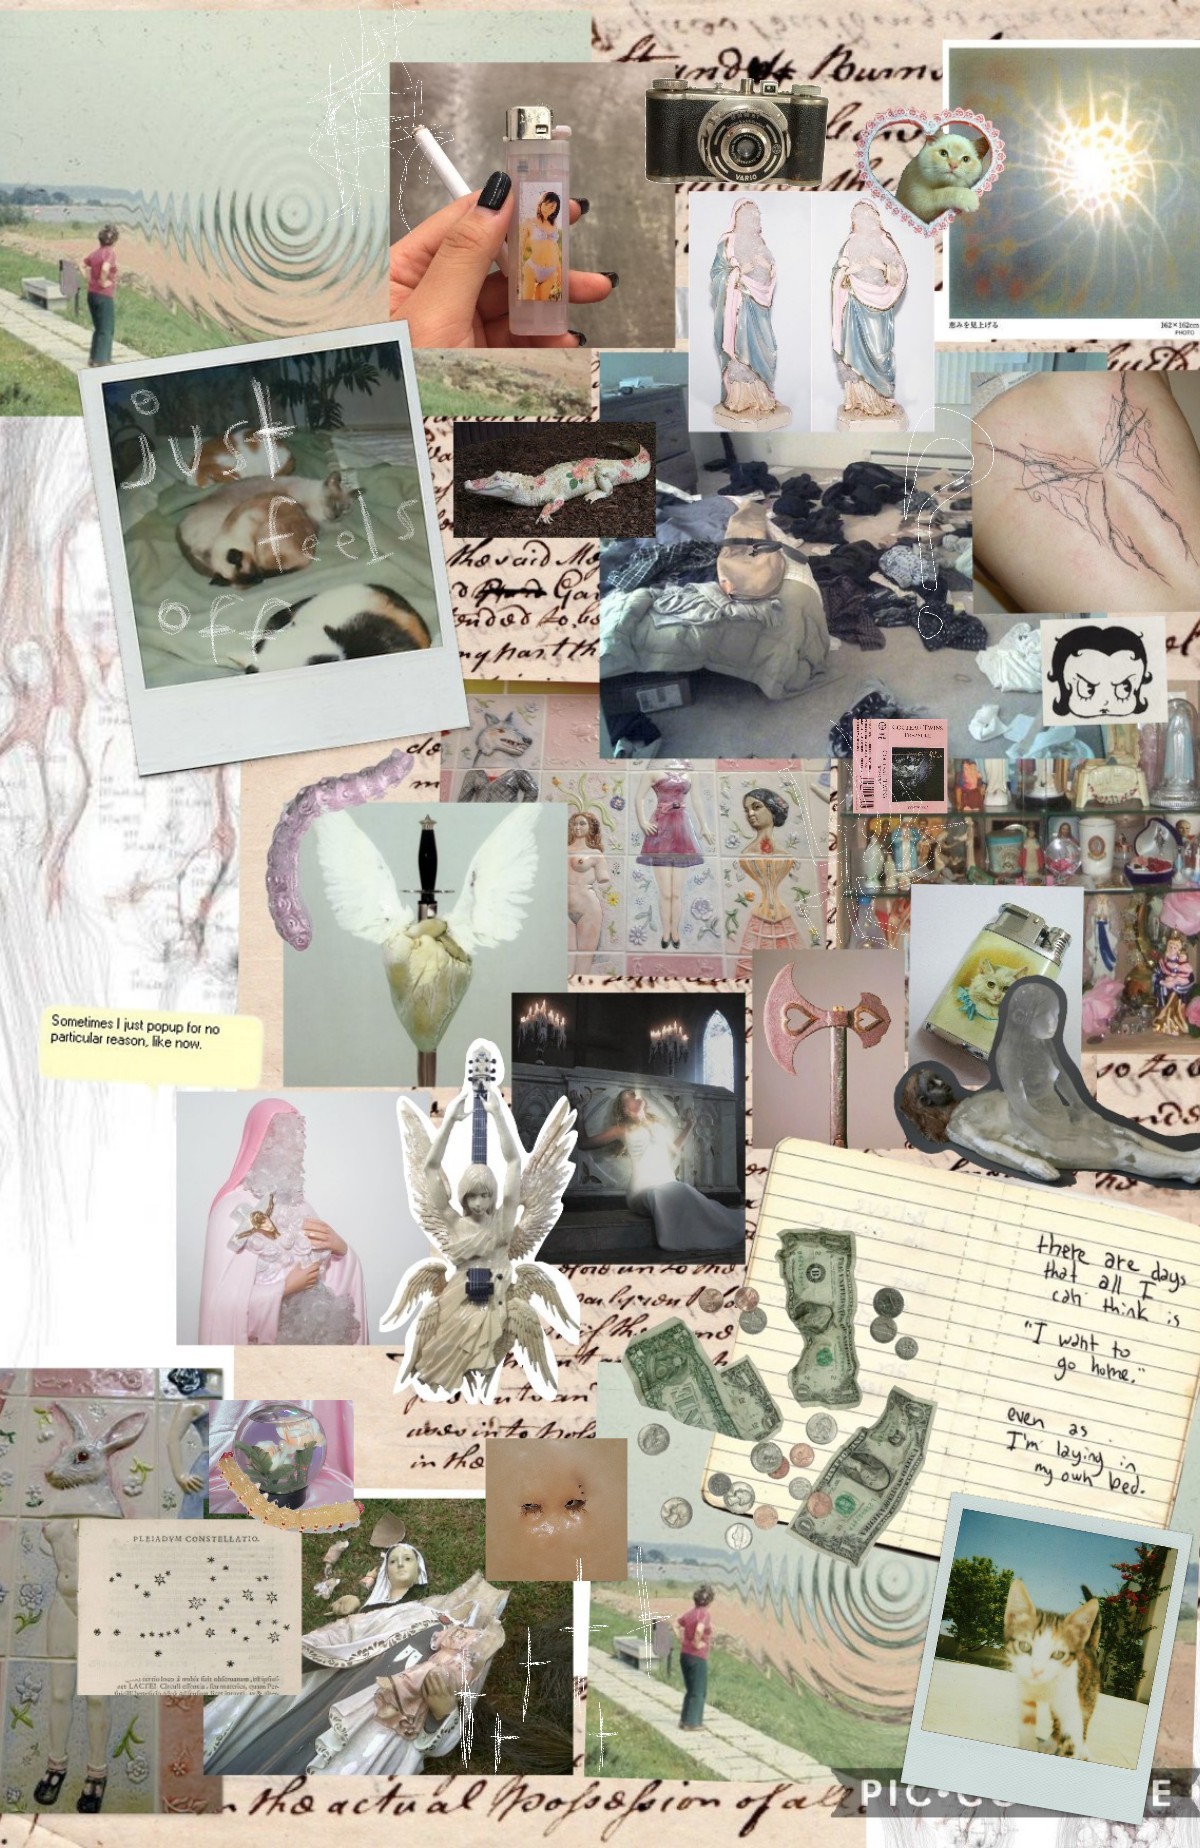  aug † 8 † 2022 • stuck in place ; hey everybody !! hope your all doing well <3 just got back from vacation and i have the flu </3 but at least I get 2 stay home and make collages !!